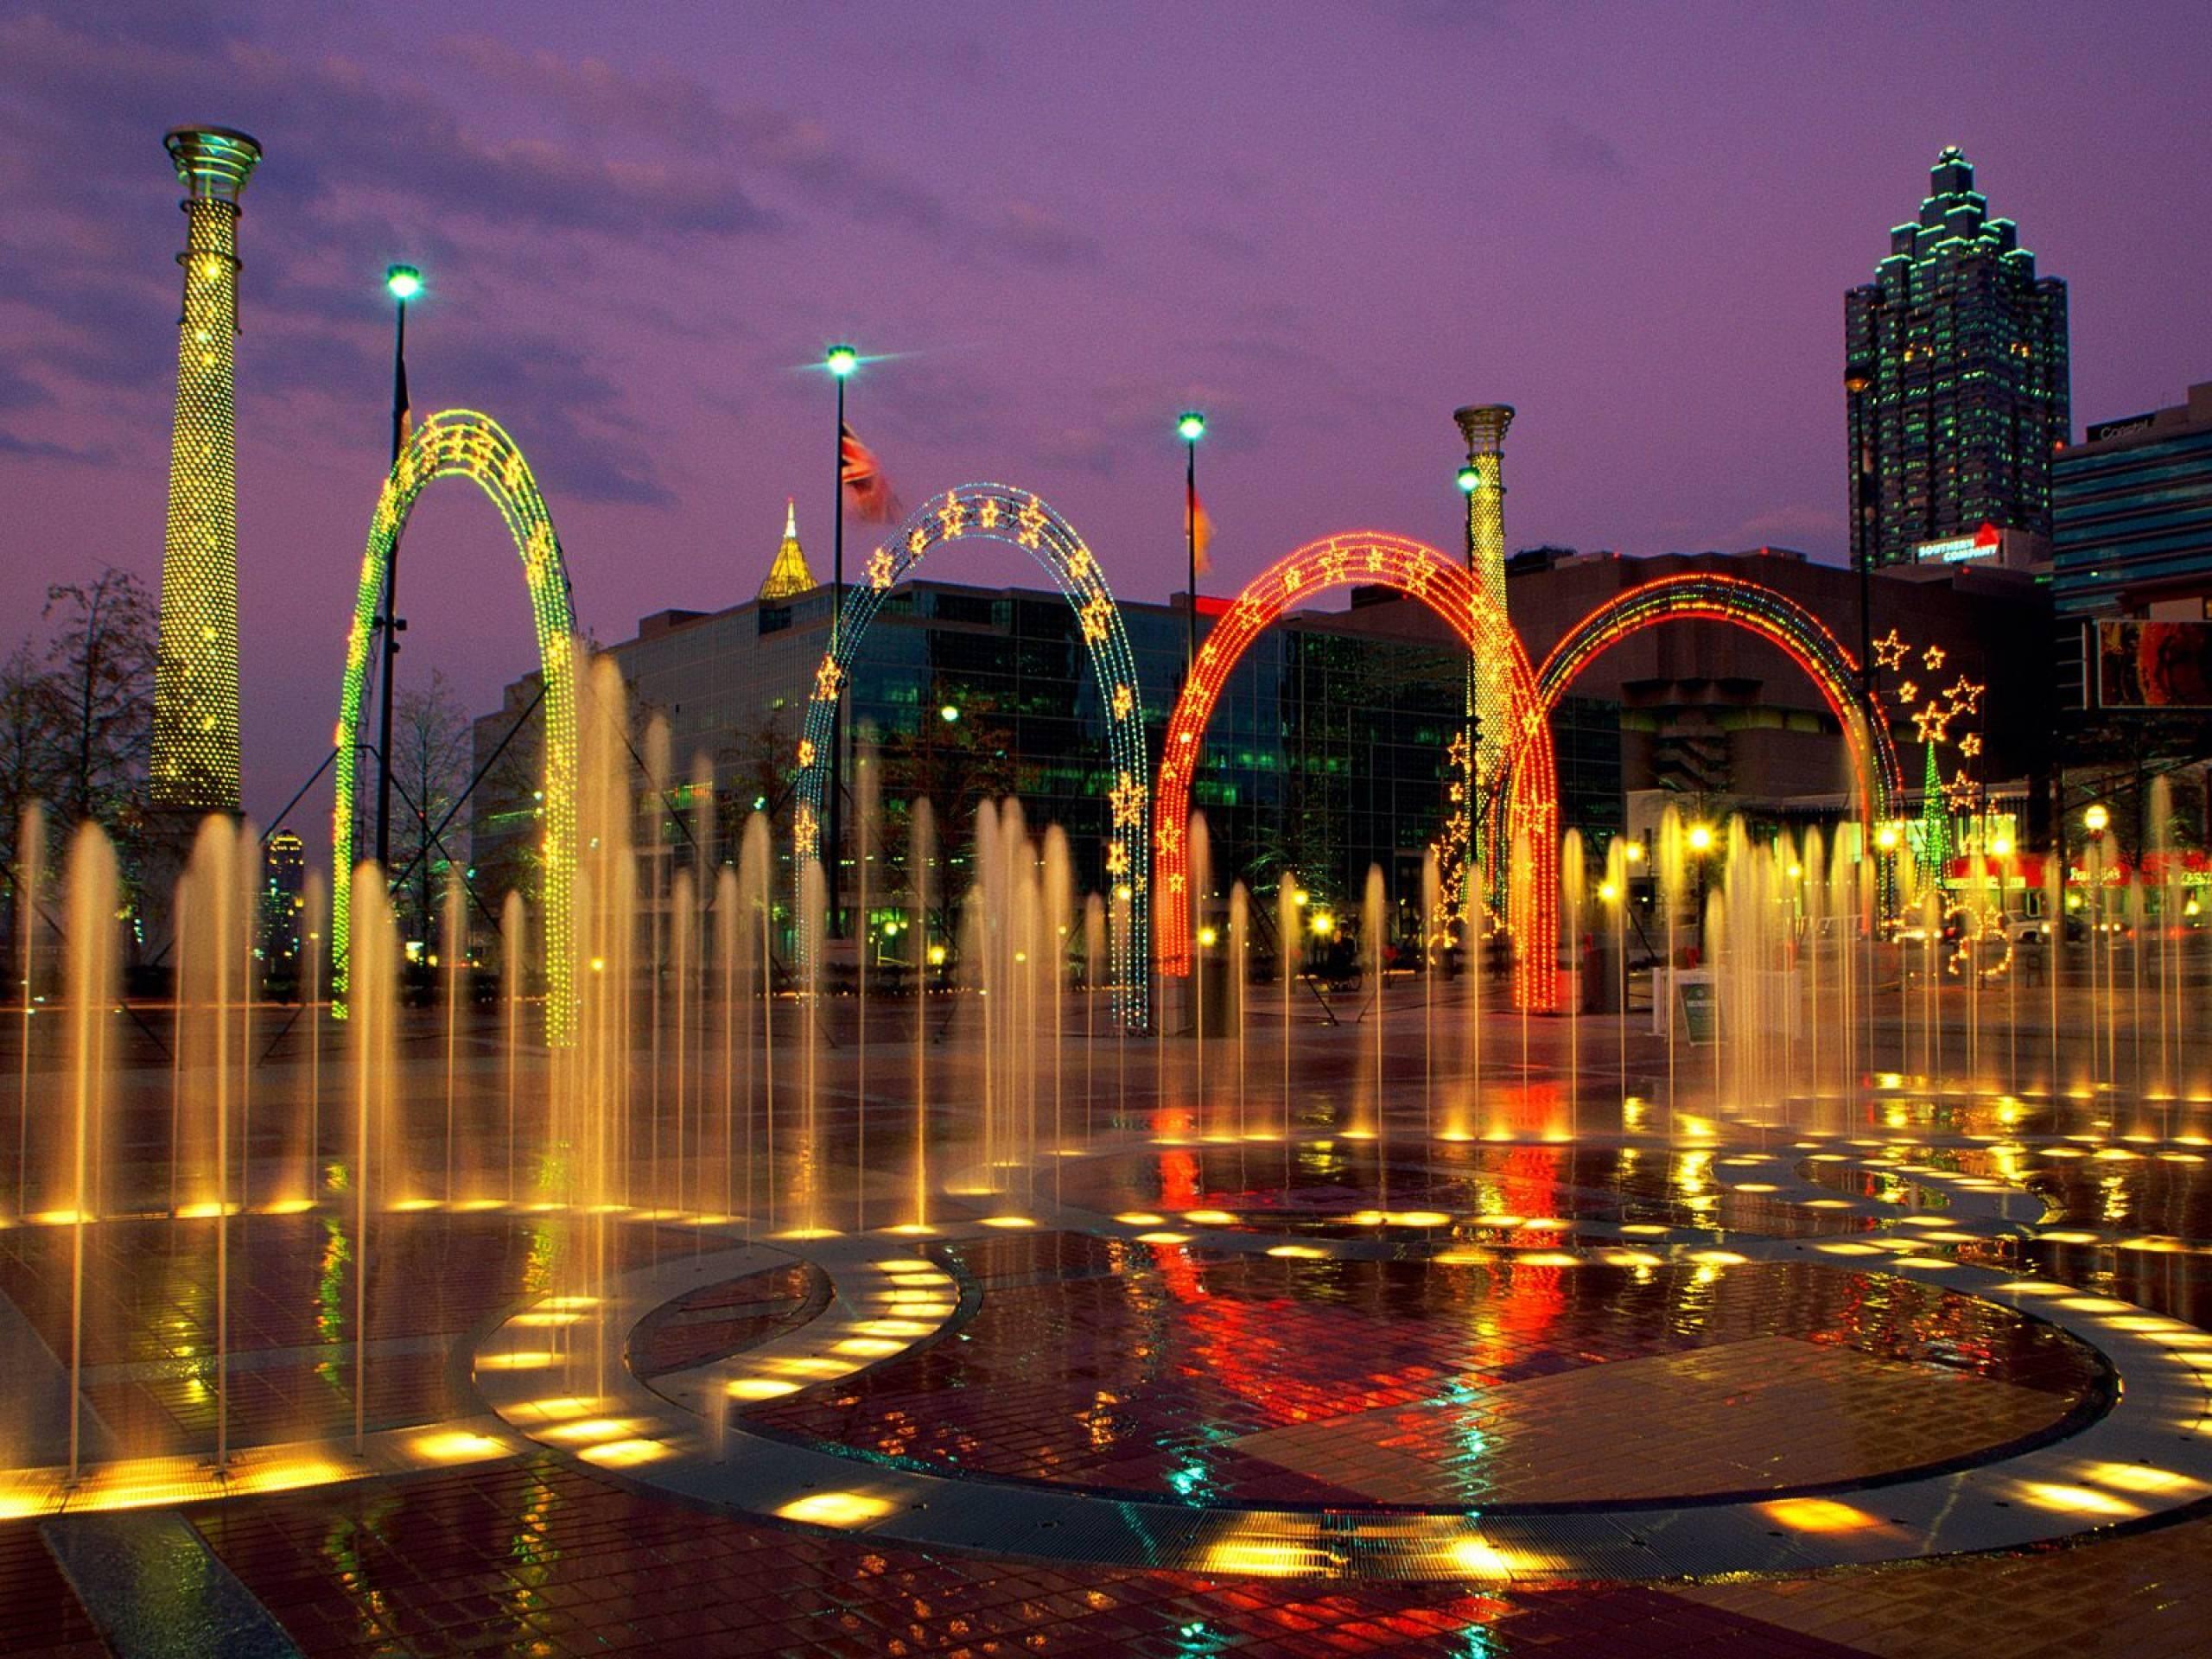 Amazing Fountain of Centennial Olympic Park in City Georgia United